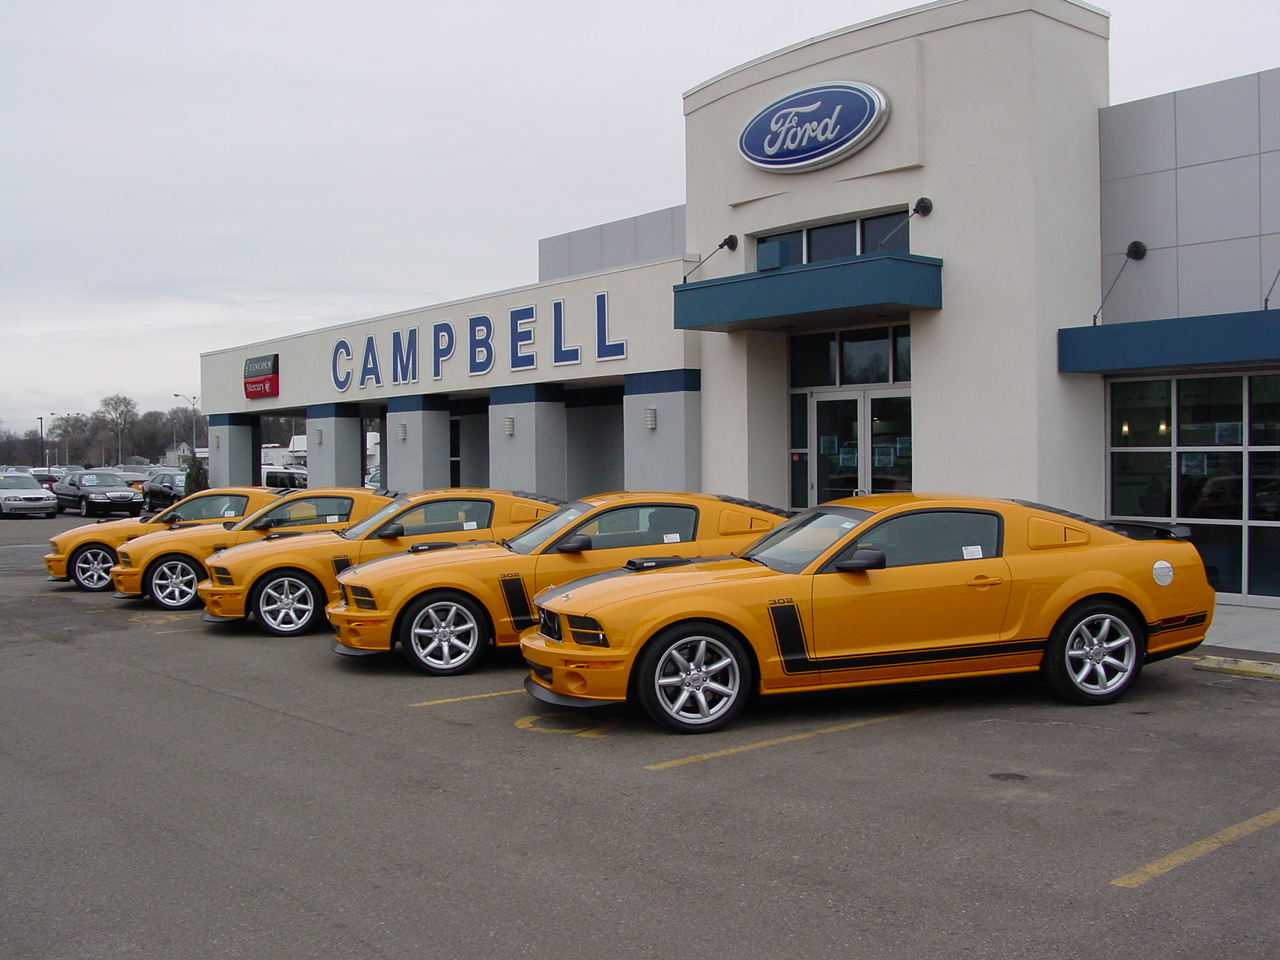 Campbell ford dealership niles mi